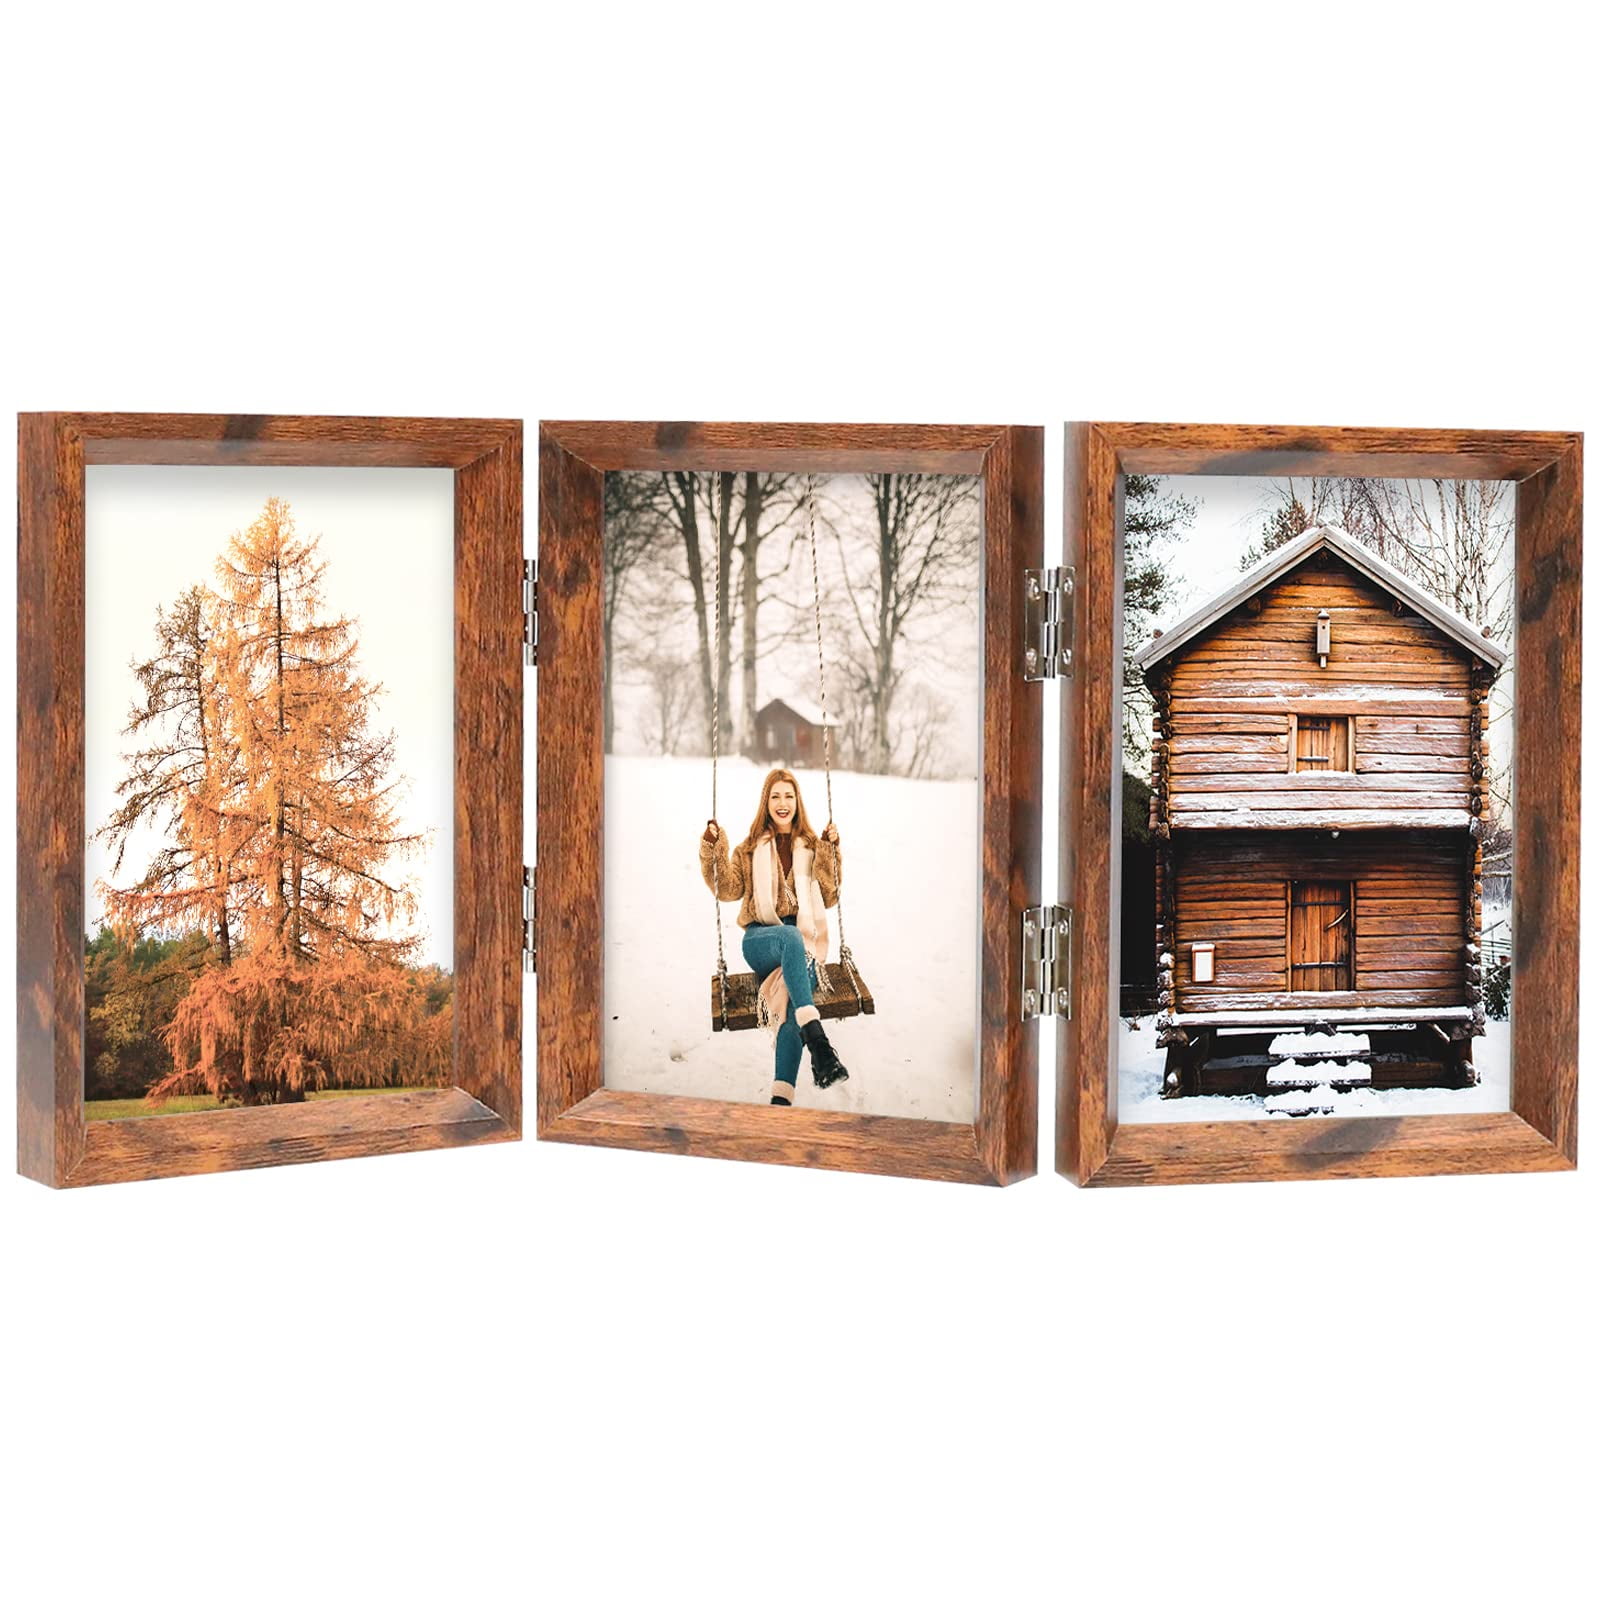 4x6 Inch Rustic Patched Picture Frame Wood, Mdf & Glass By